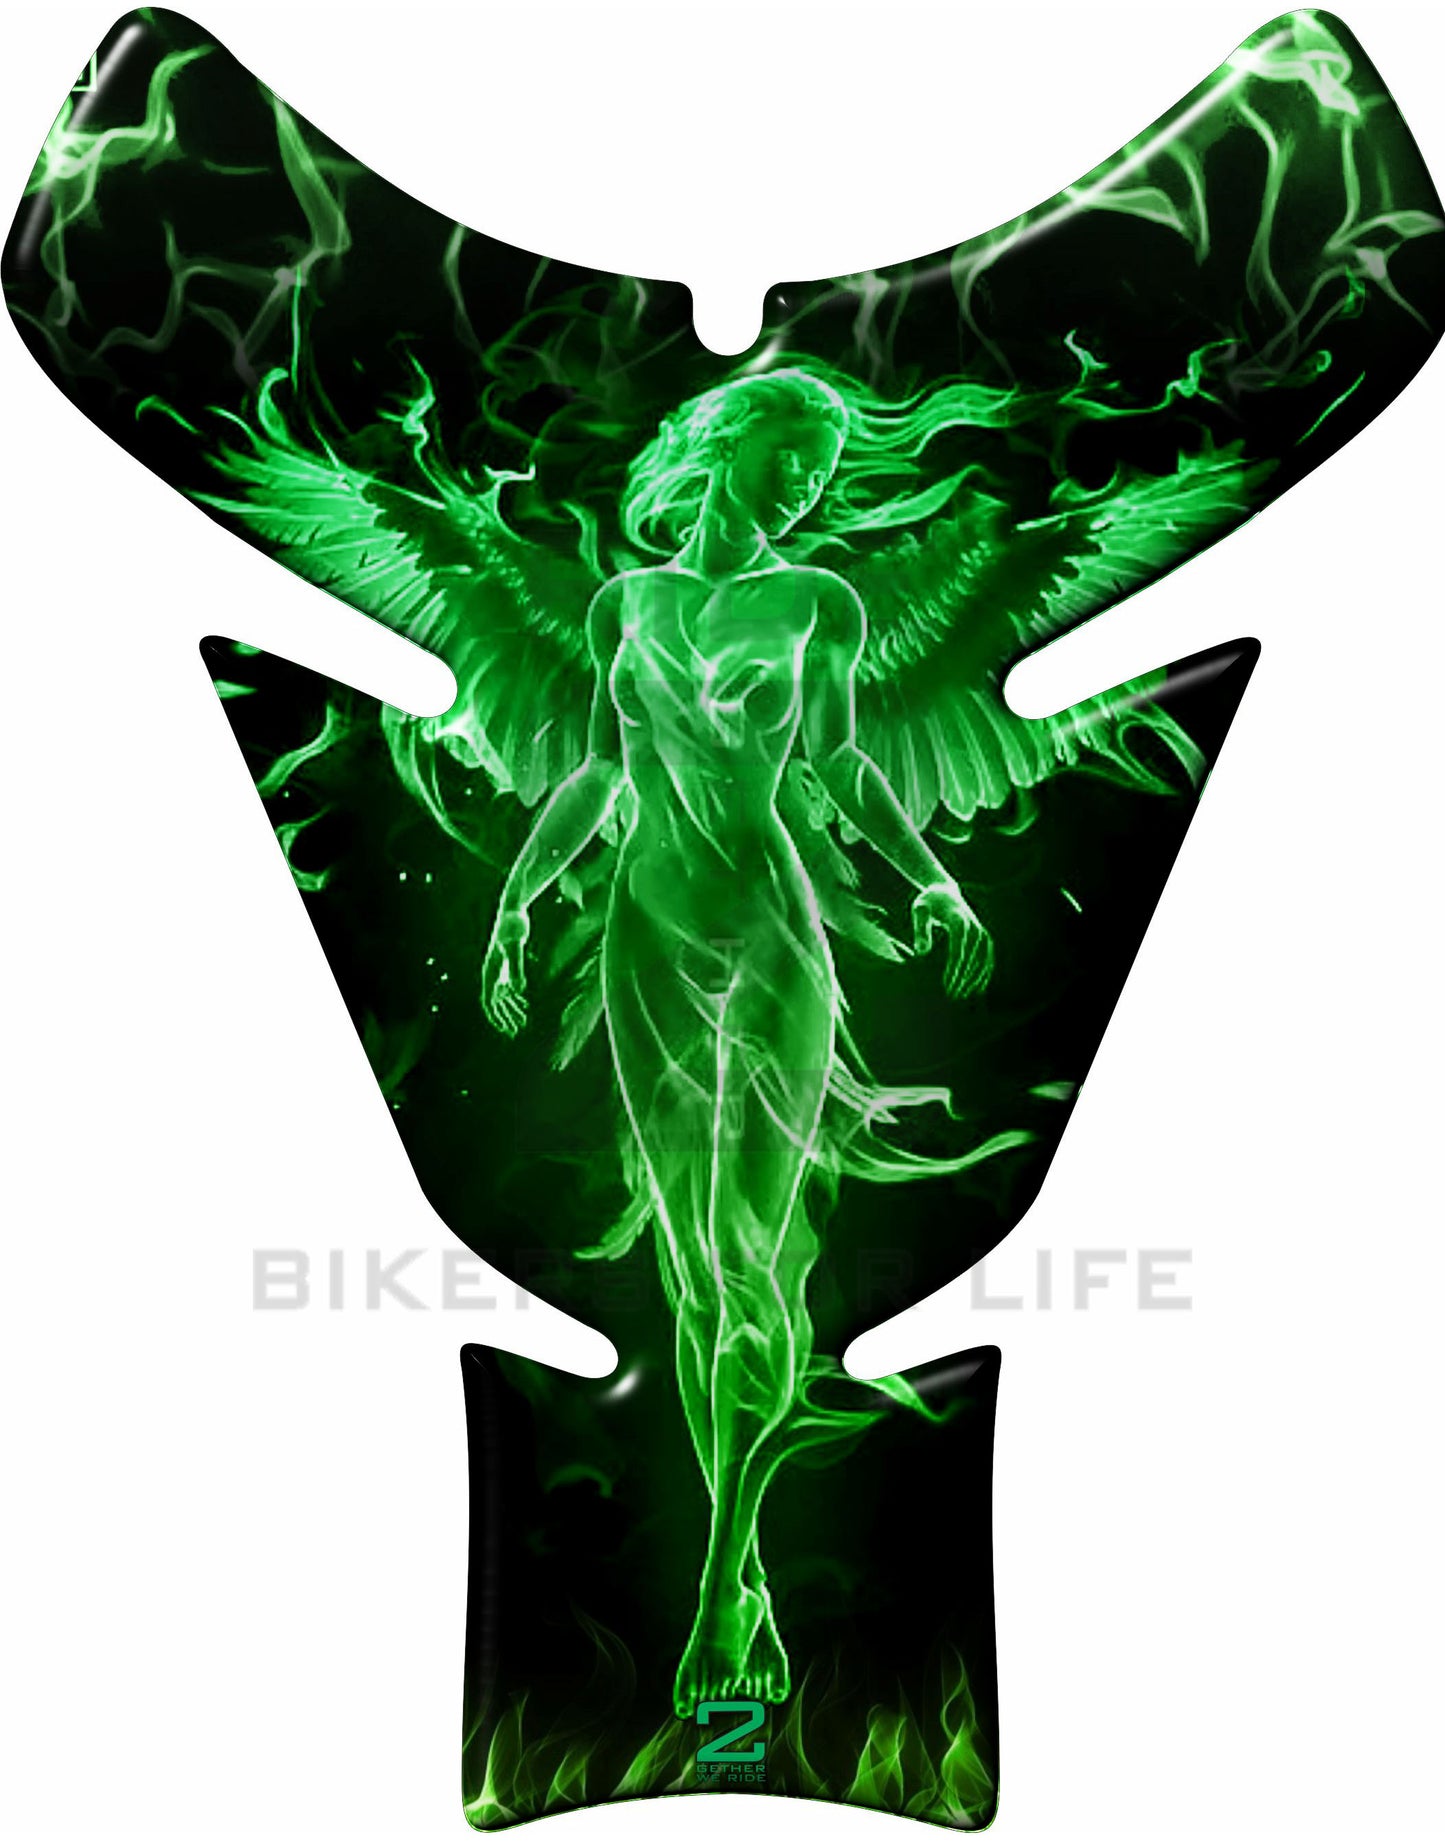 Green and Black Universal Fit Angelic Flaming Tank Pad Protector. A street pad which fits most models.